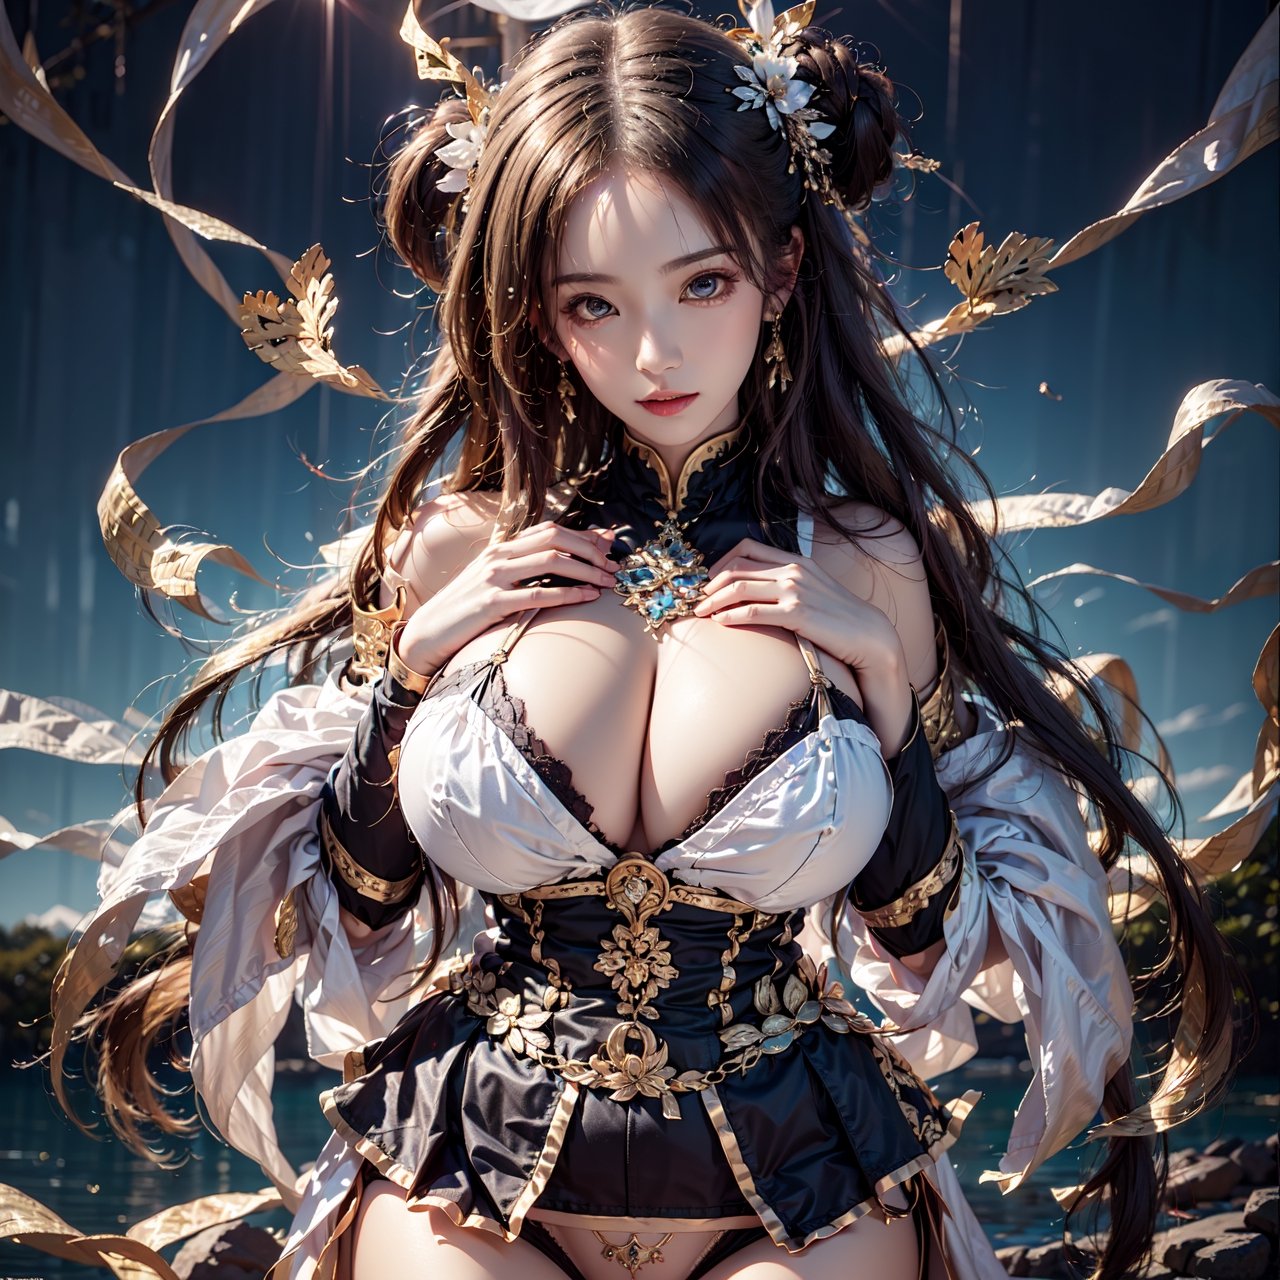 1 girl, anime, full body, modelsheet, big boobies, big breast, huge breasts(CharacterSheet:1)(masterpiece, top quality, best quality, official art, beautiful and aesthetic:1.2), extreme detailed,(fractal art:1.3),highest detailed, miniskirt,  bare shoulders, (best quality, masterpiece:1.2), 8K, HDR, photorealistic, 1girl, white school_uniform, (transparent blouse:1.3), black lace bra inside, navy blue skirt, raises skirt, semi-transaparent panty, shy look, asian girl, breasts, charming smile,solo,breasts,blurry light background,Sexy Big Breast, Wsitting,girl